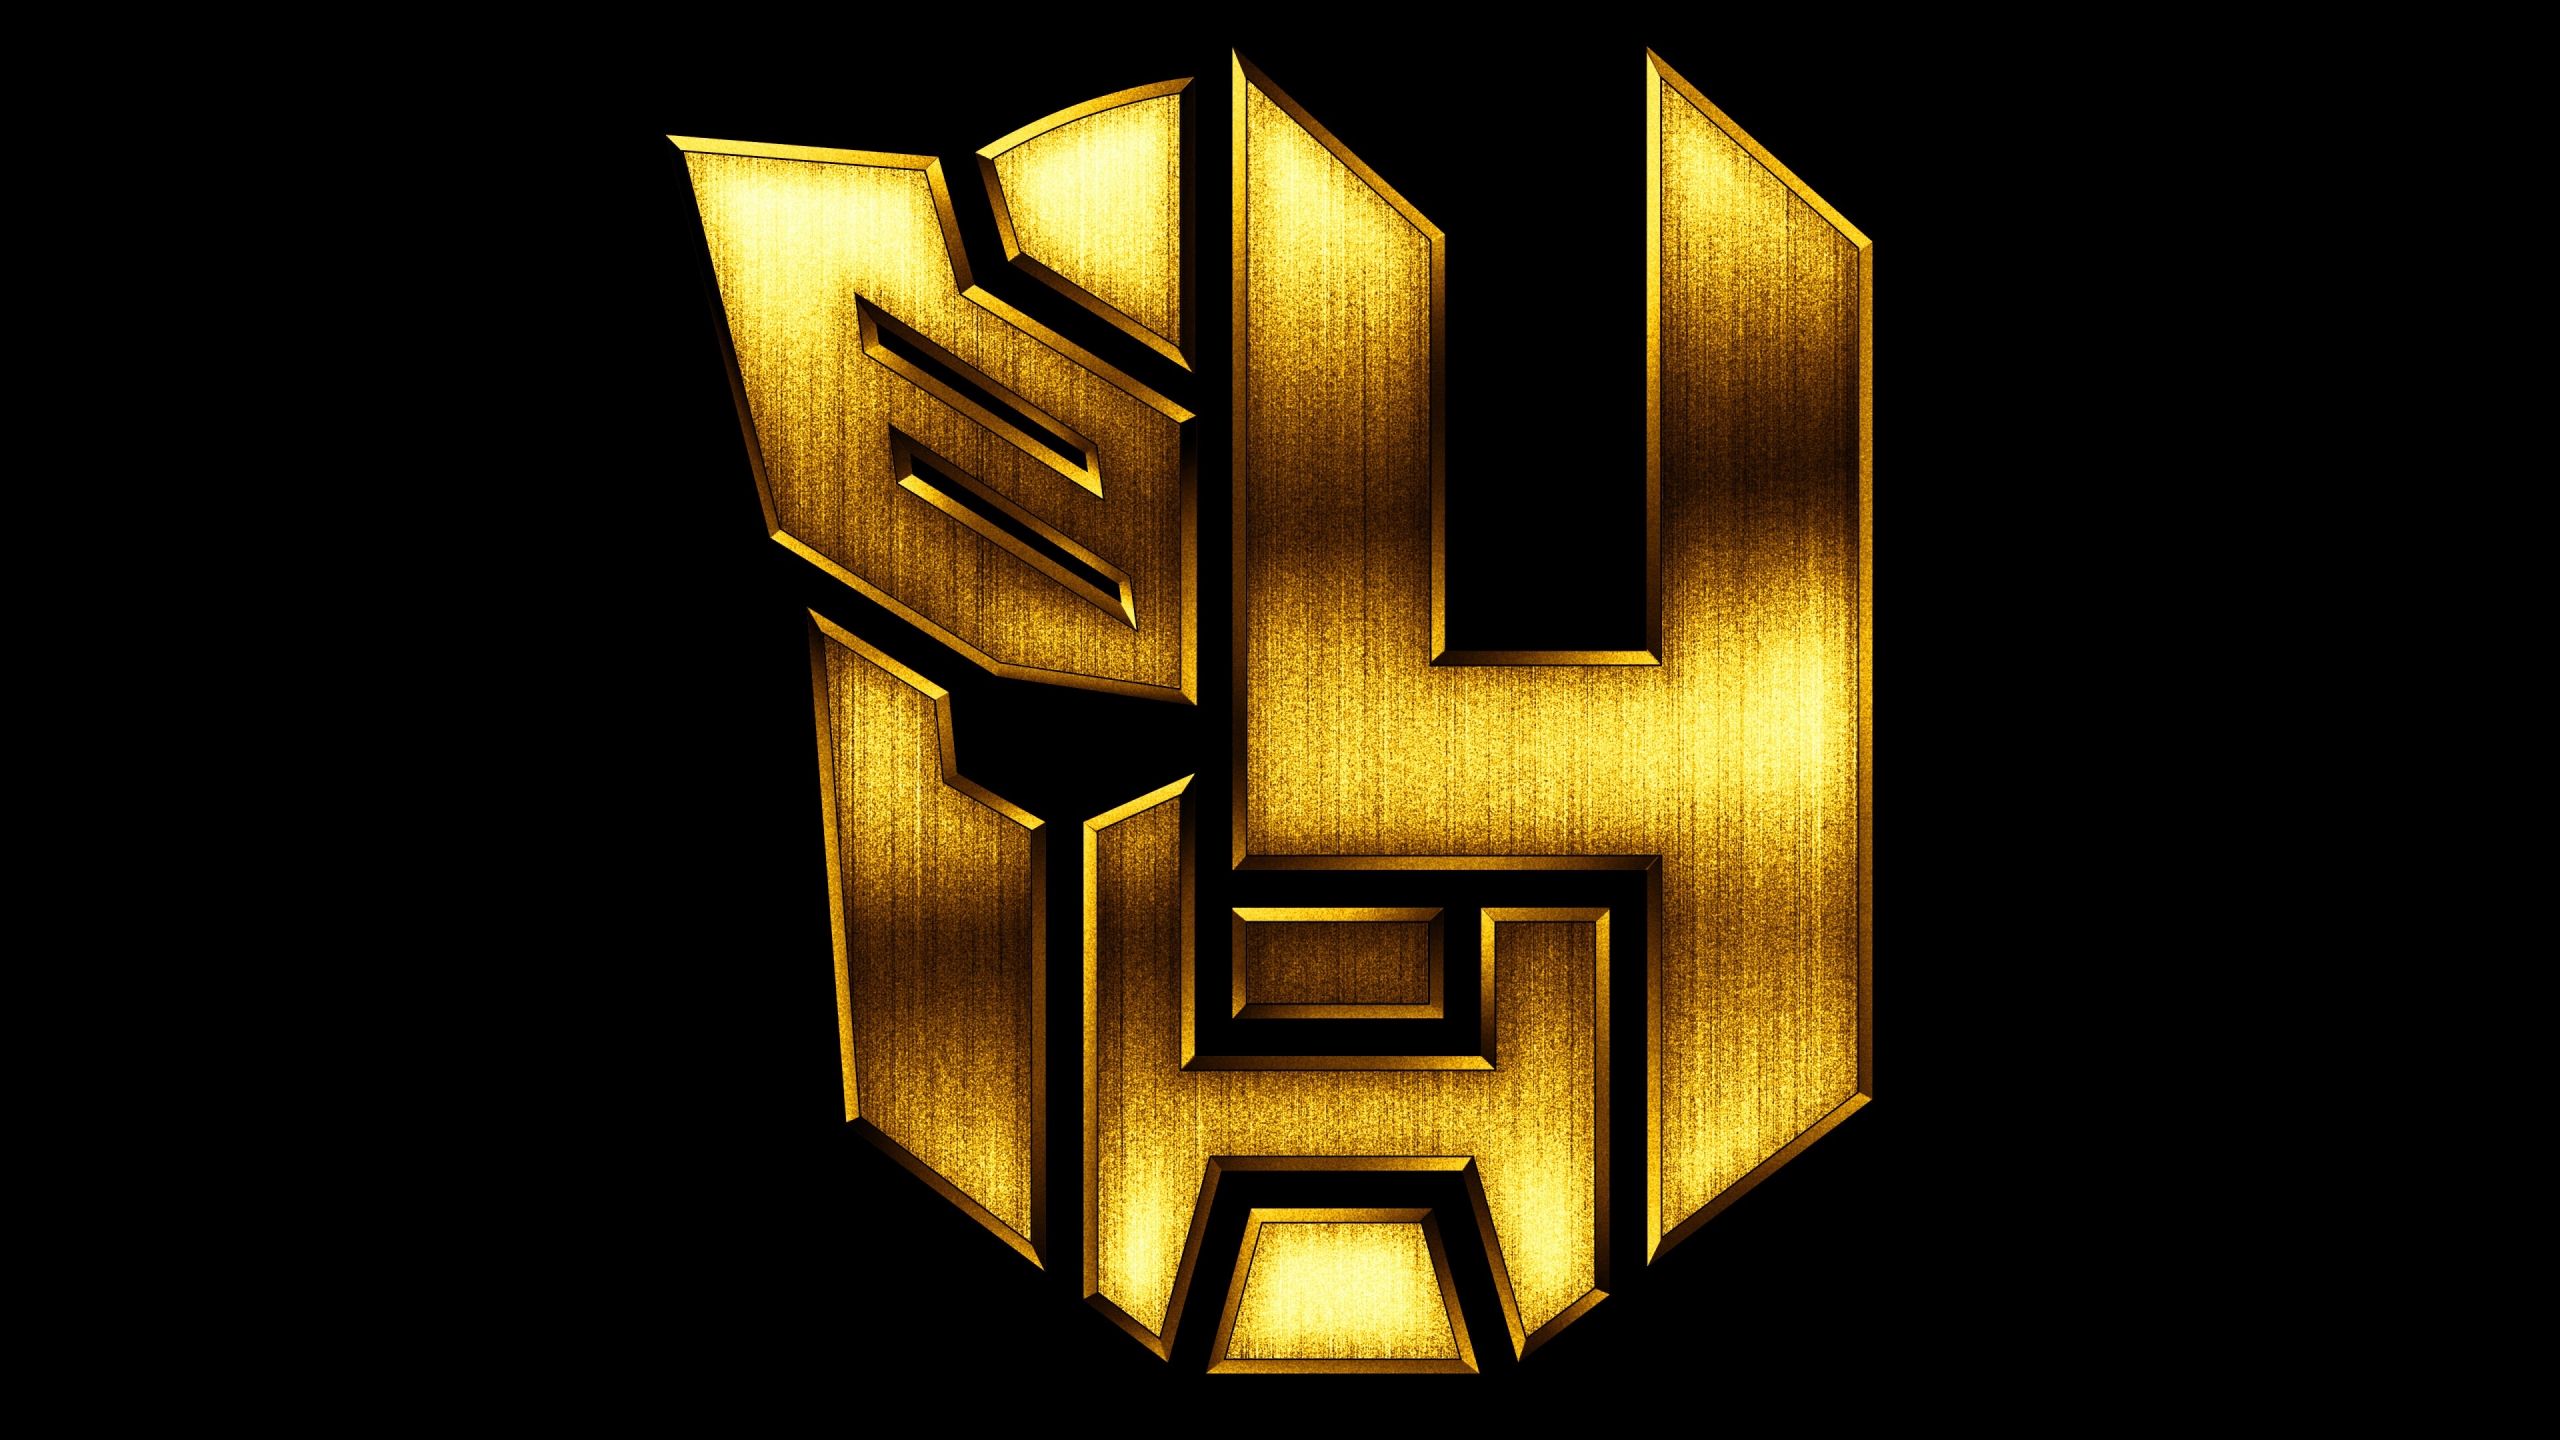 Transformers 4 Age of Extinction 2014 for 2560x1440 HDTV resolution